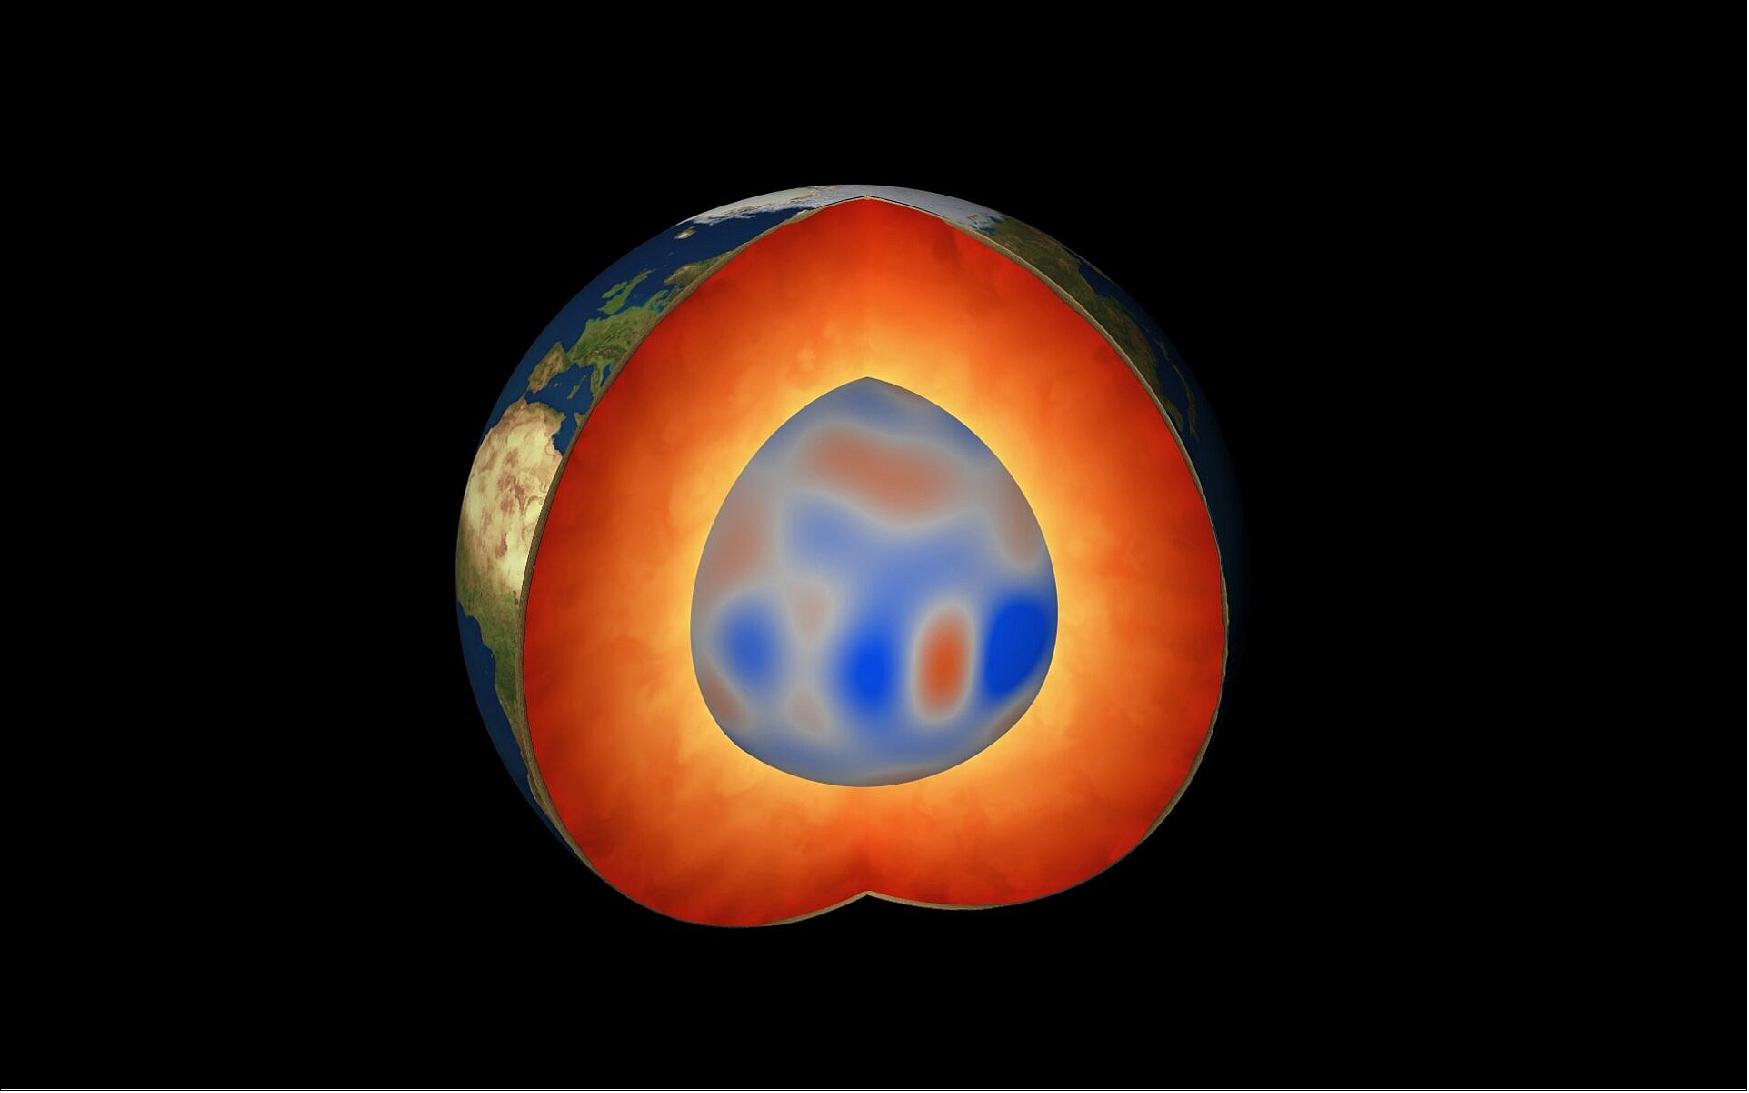 Figure 37: Swarm reveals magnetic waves across Earth’s outer core. Using information from ESA’s Swarm satellite mission, scientists have discovered a completely new type of magnetic wave that sweeps across the outermost part of Earth’s outer core every seven years. This fascinating finding opens a new window into a world we can never see. This mysterious wave oscillates every seven years and propagates westward at up to 1500 km a year (image credit: ESA/Planetary Visions)